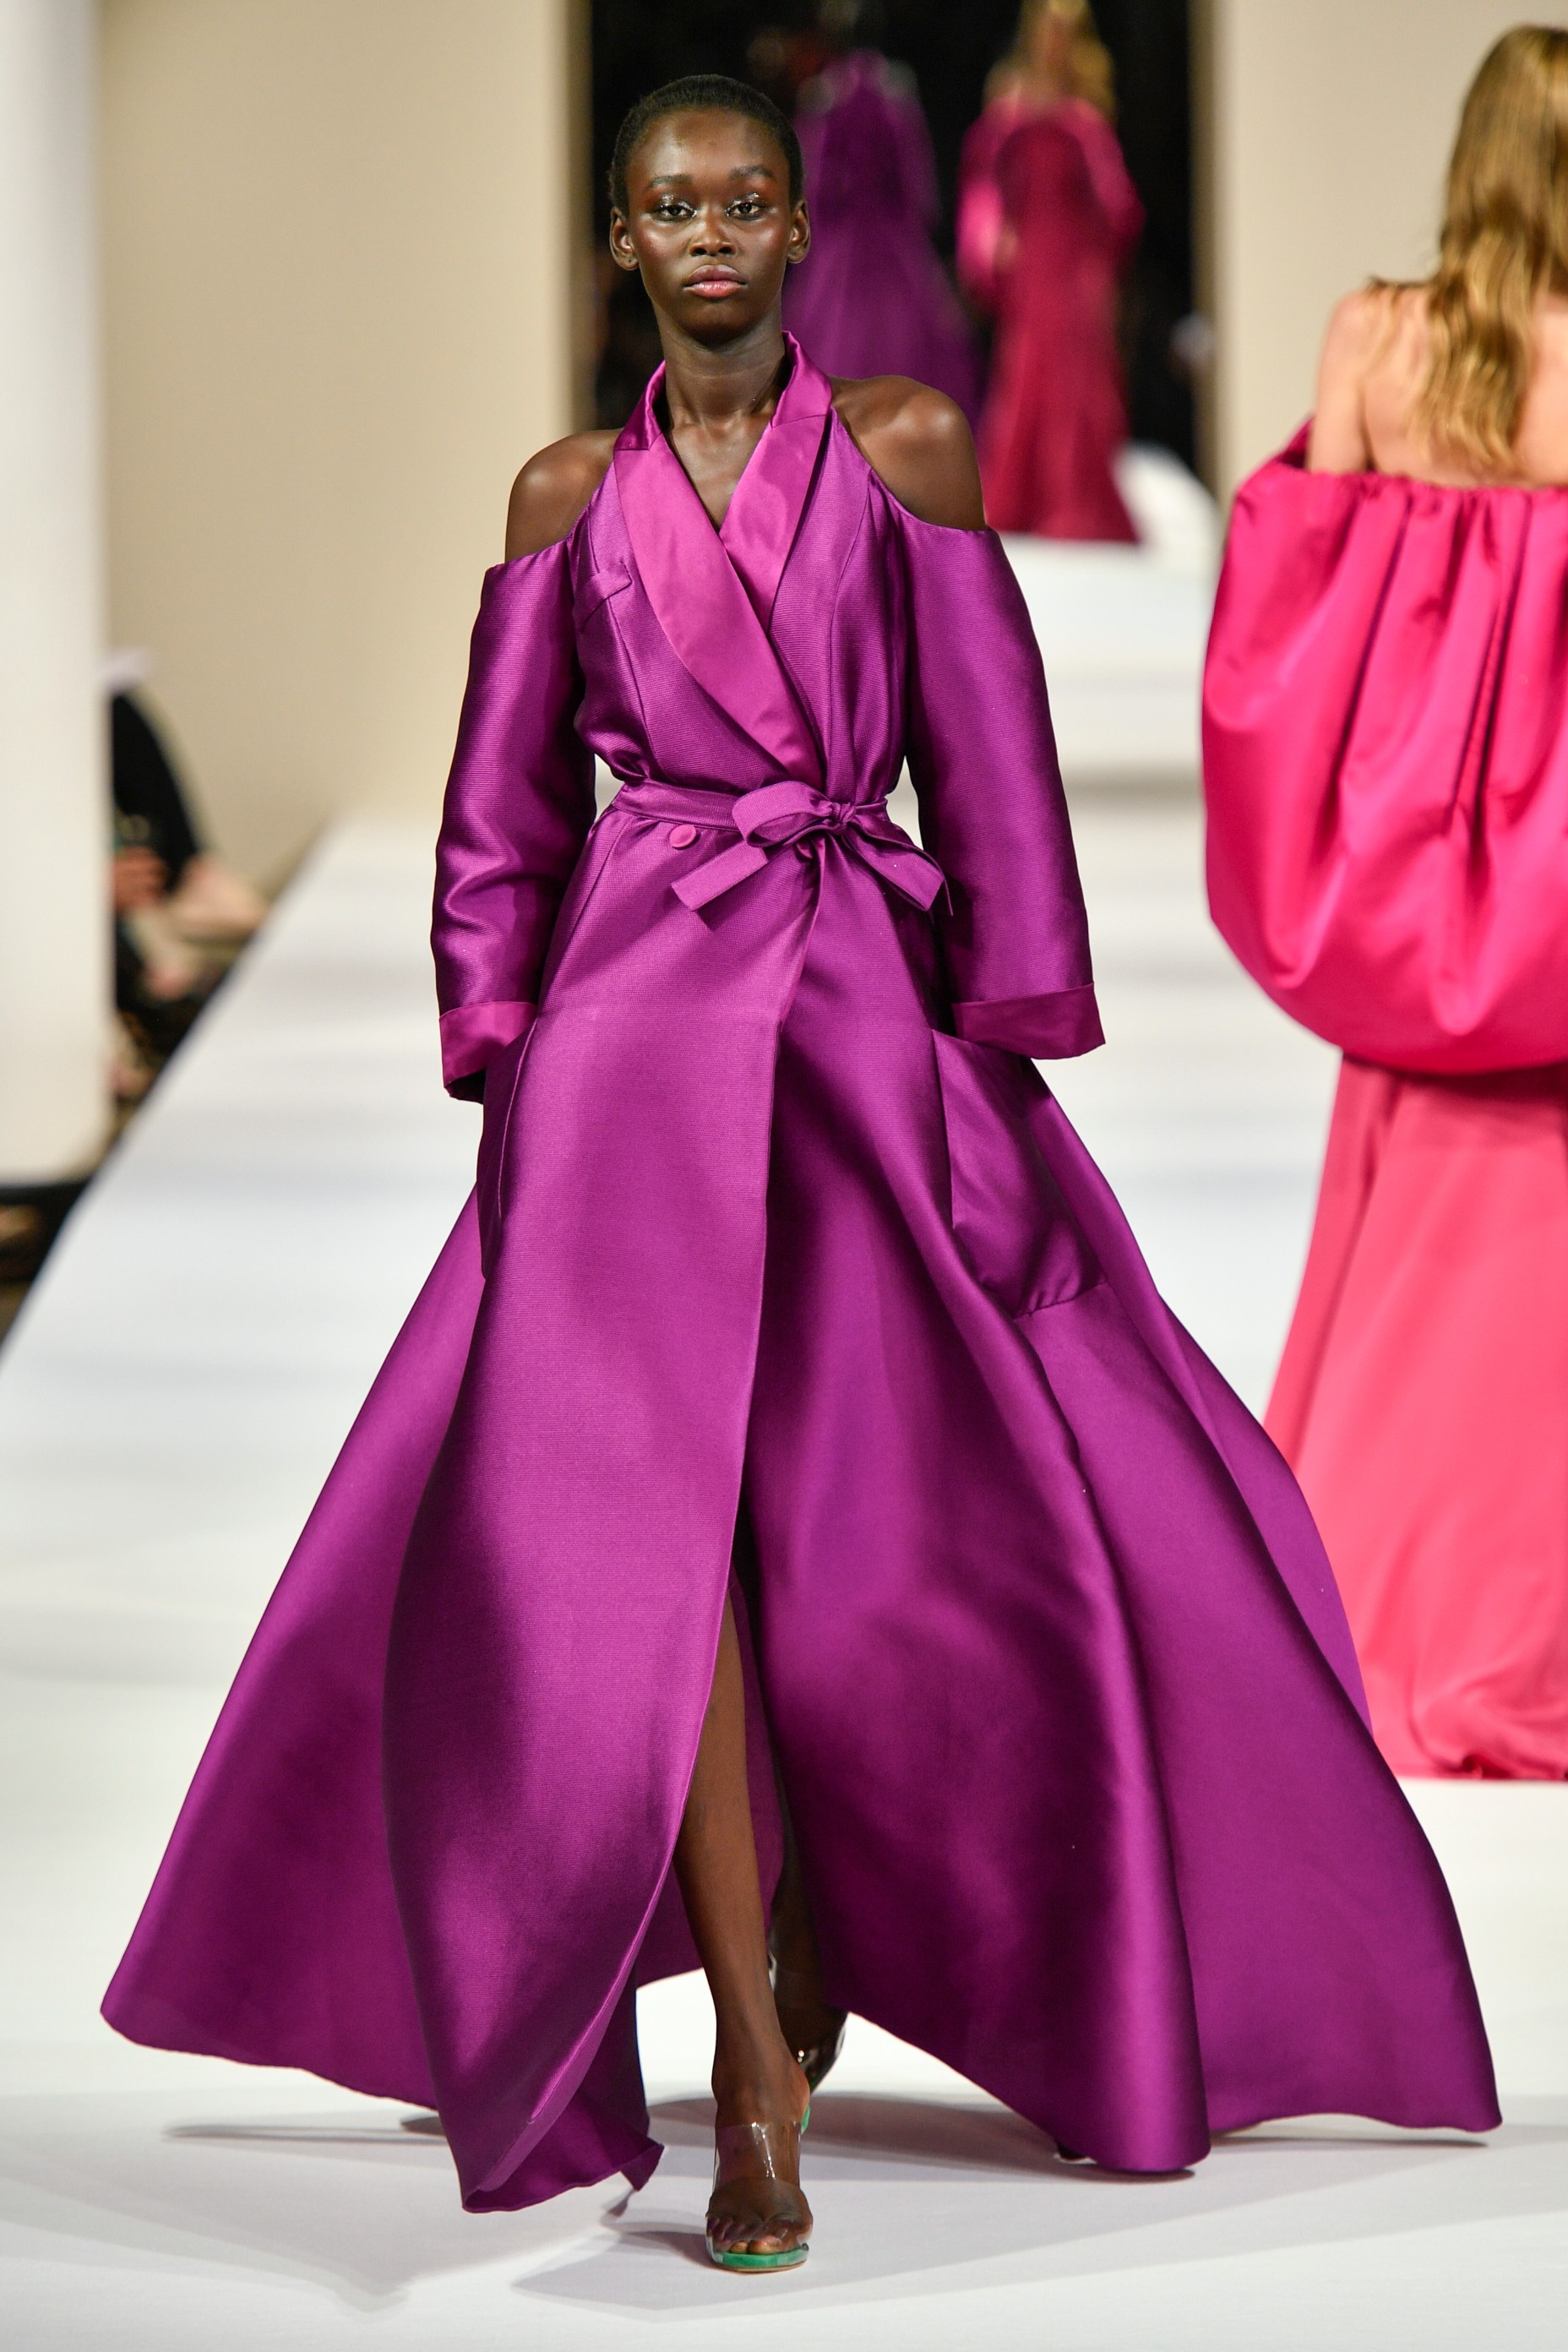 Fall 2018 Haute Couture: Alexis Mabille's Floral Winter — CoutureNotebook